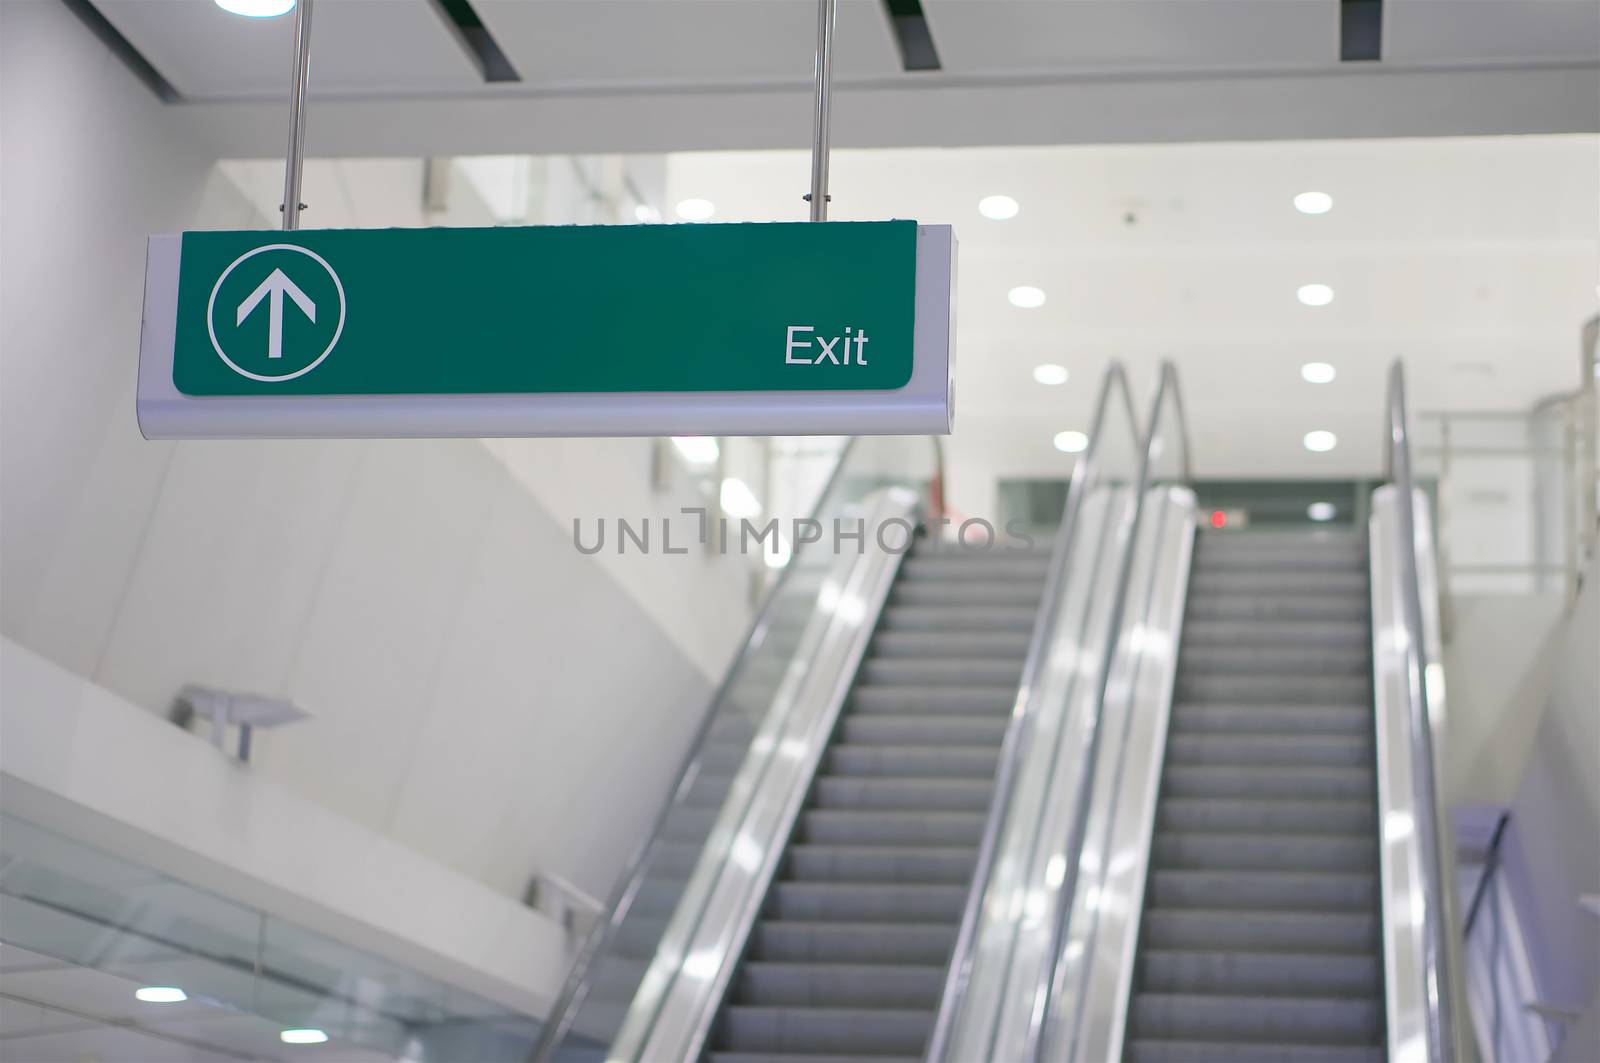 Exit information green board sign have blur escalator as background by eaglesky